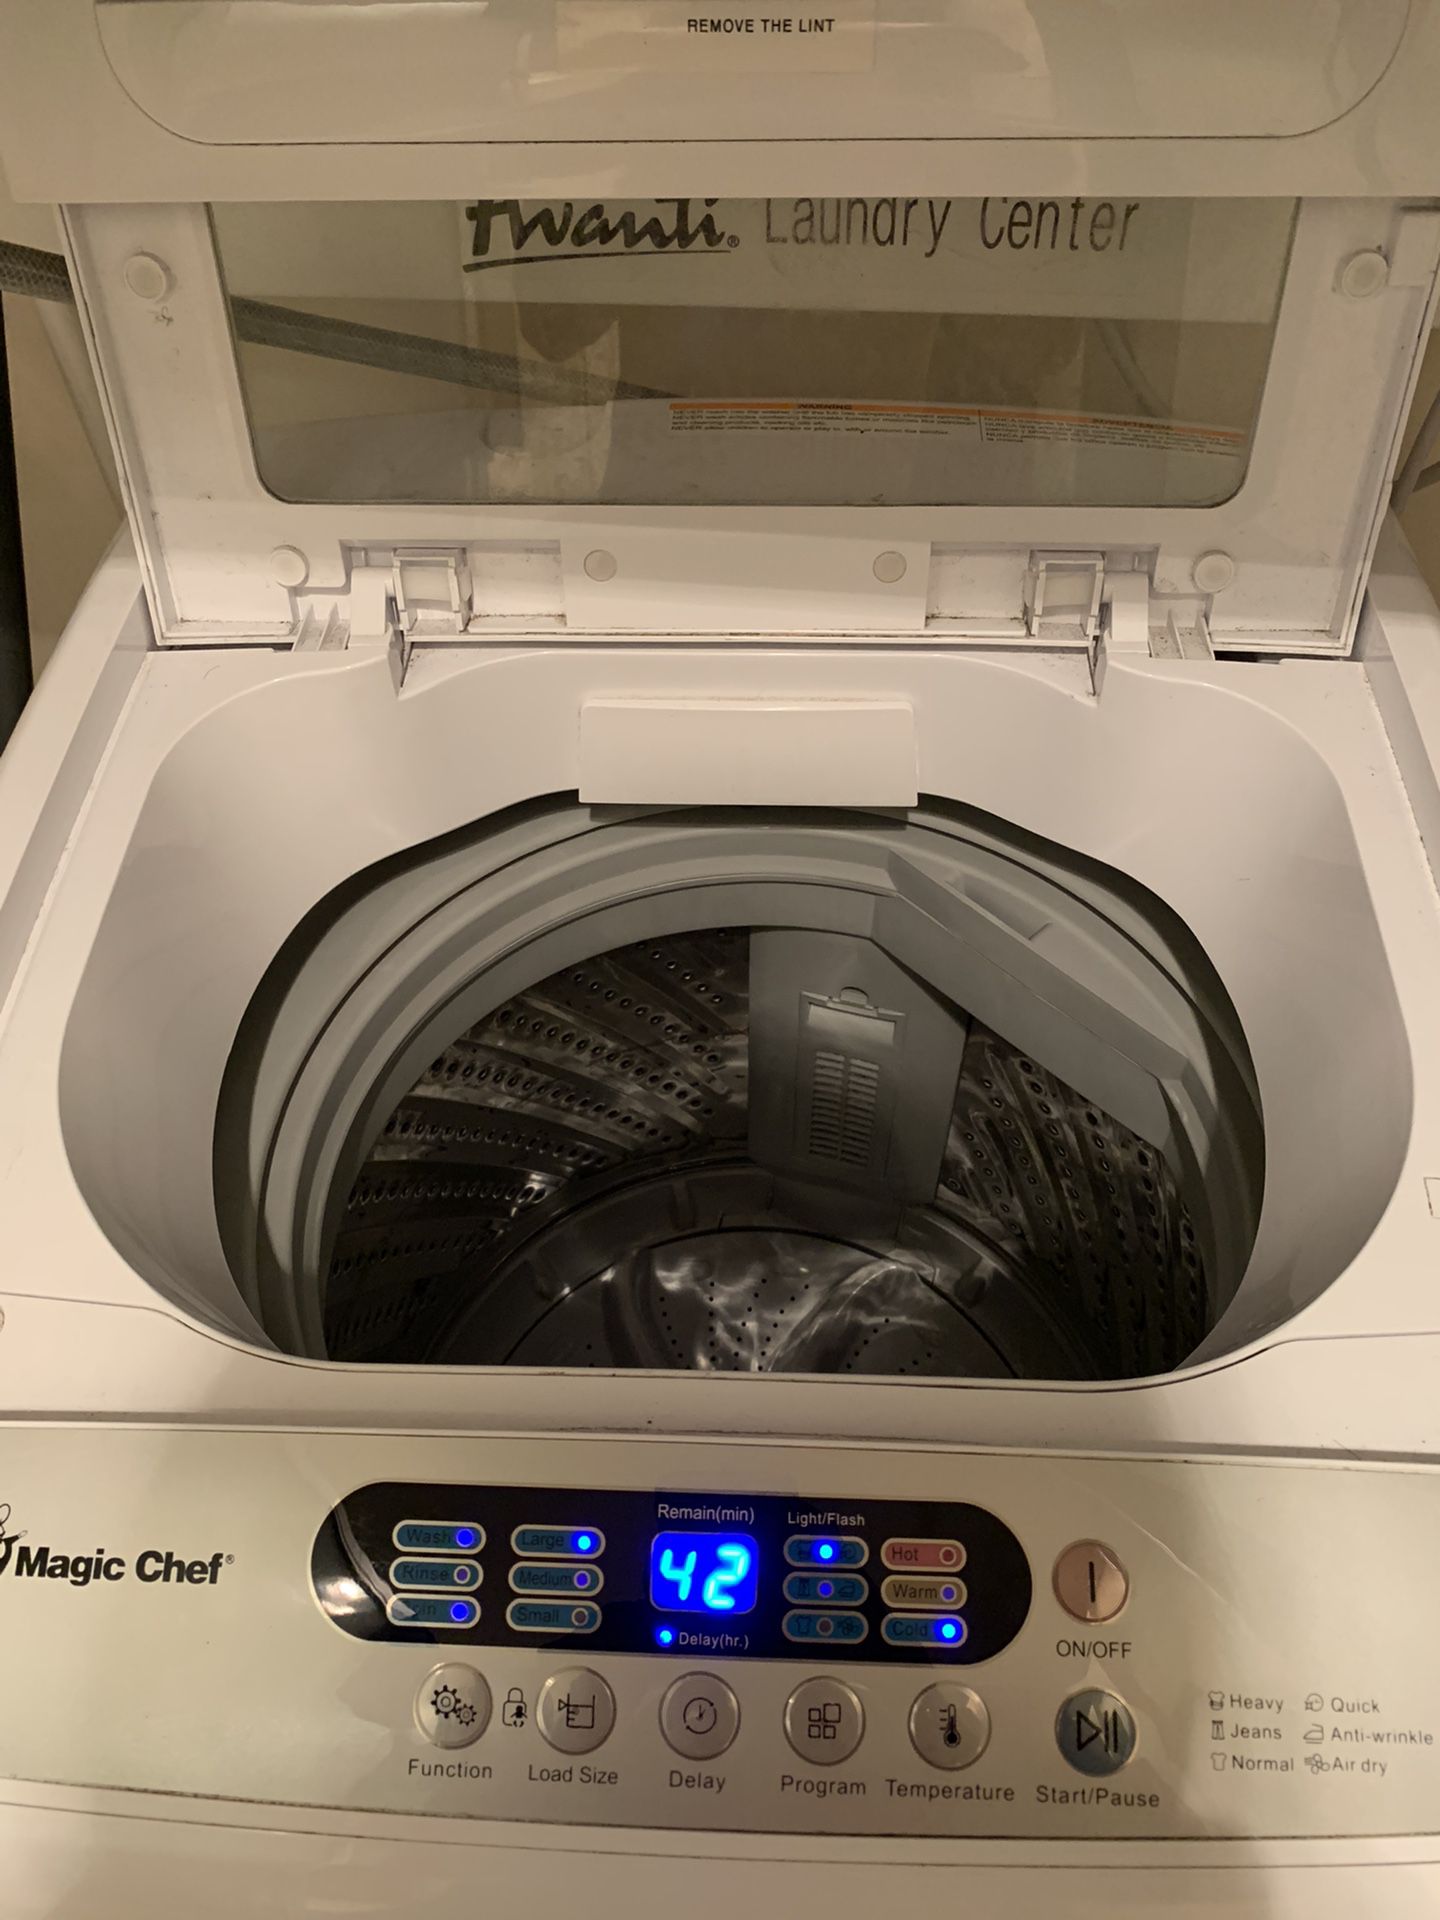 Magic chef Portable Washer 2.1 Cubic Feet (Broken Lid) for Sale in  Flushing, NY - OfferUp